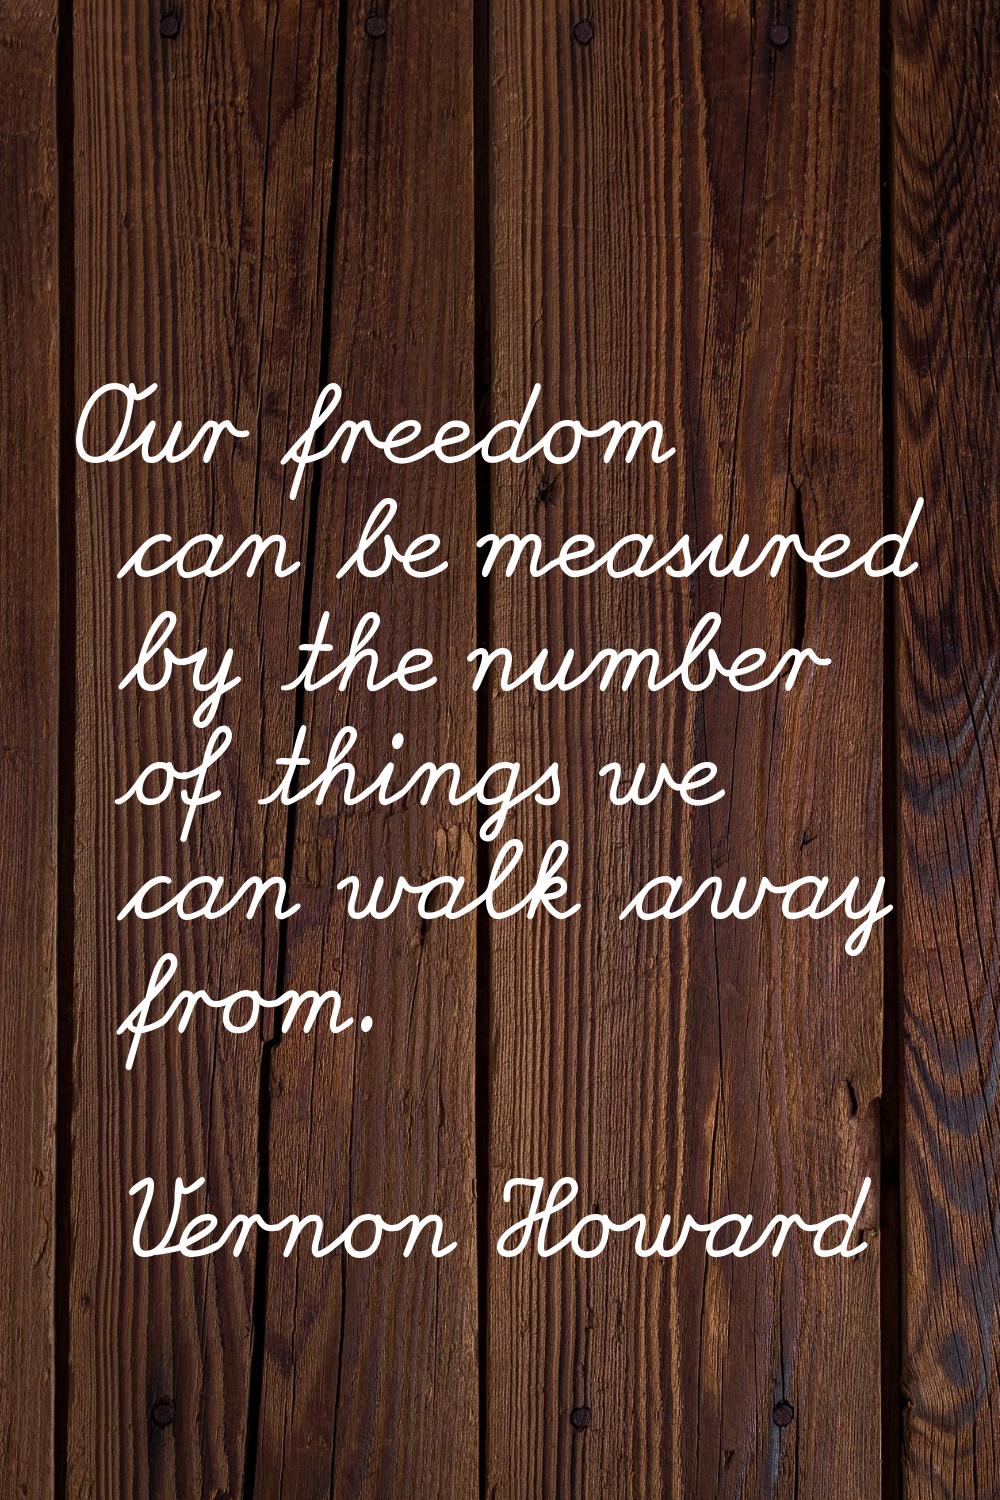 Our freedom can be measured by the number of things we can walk away from.